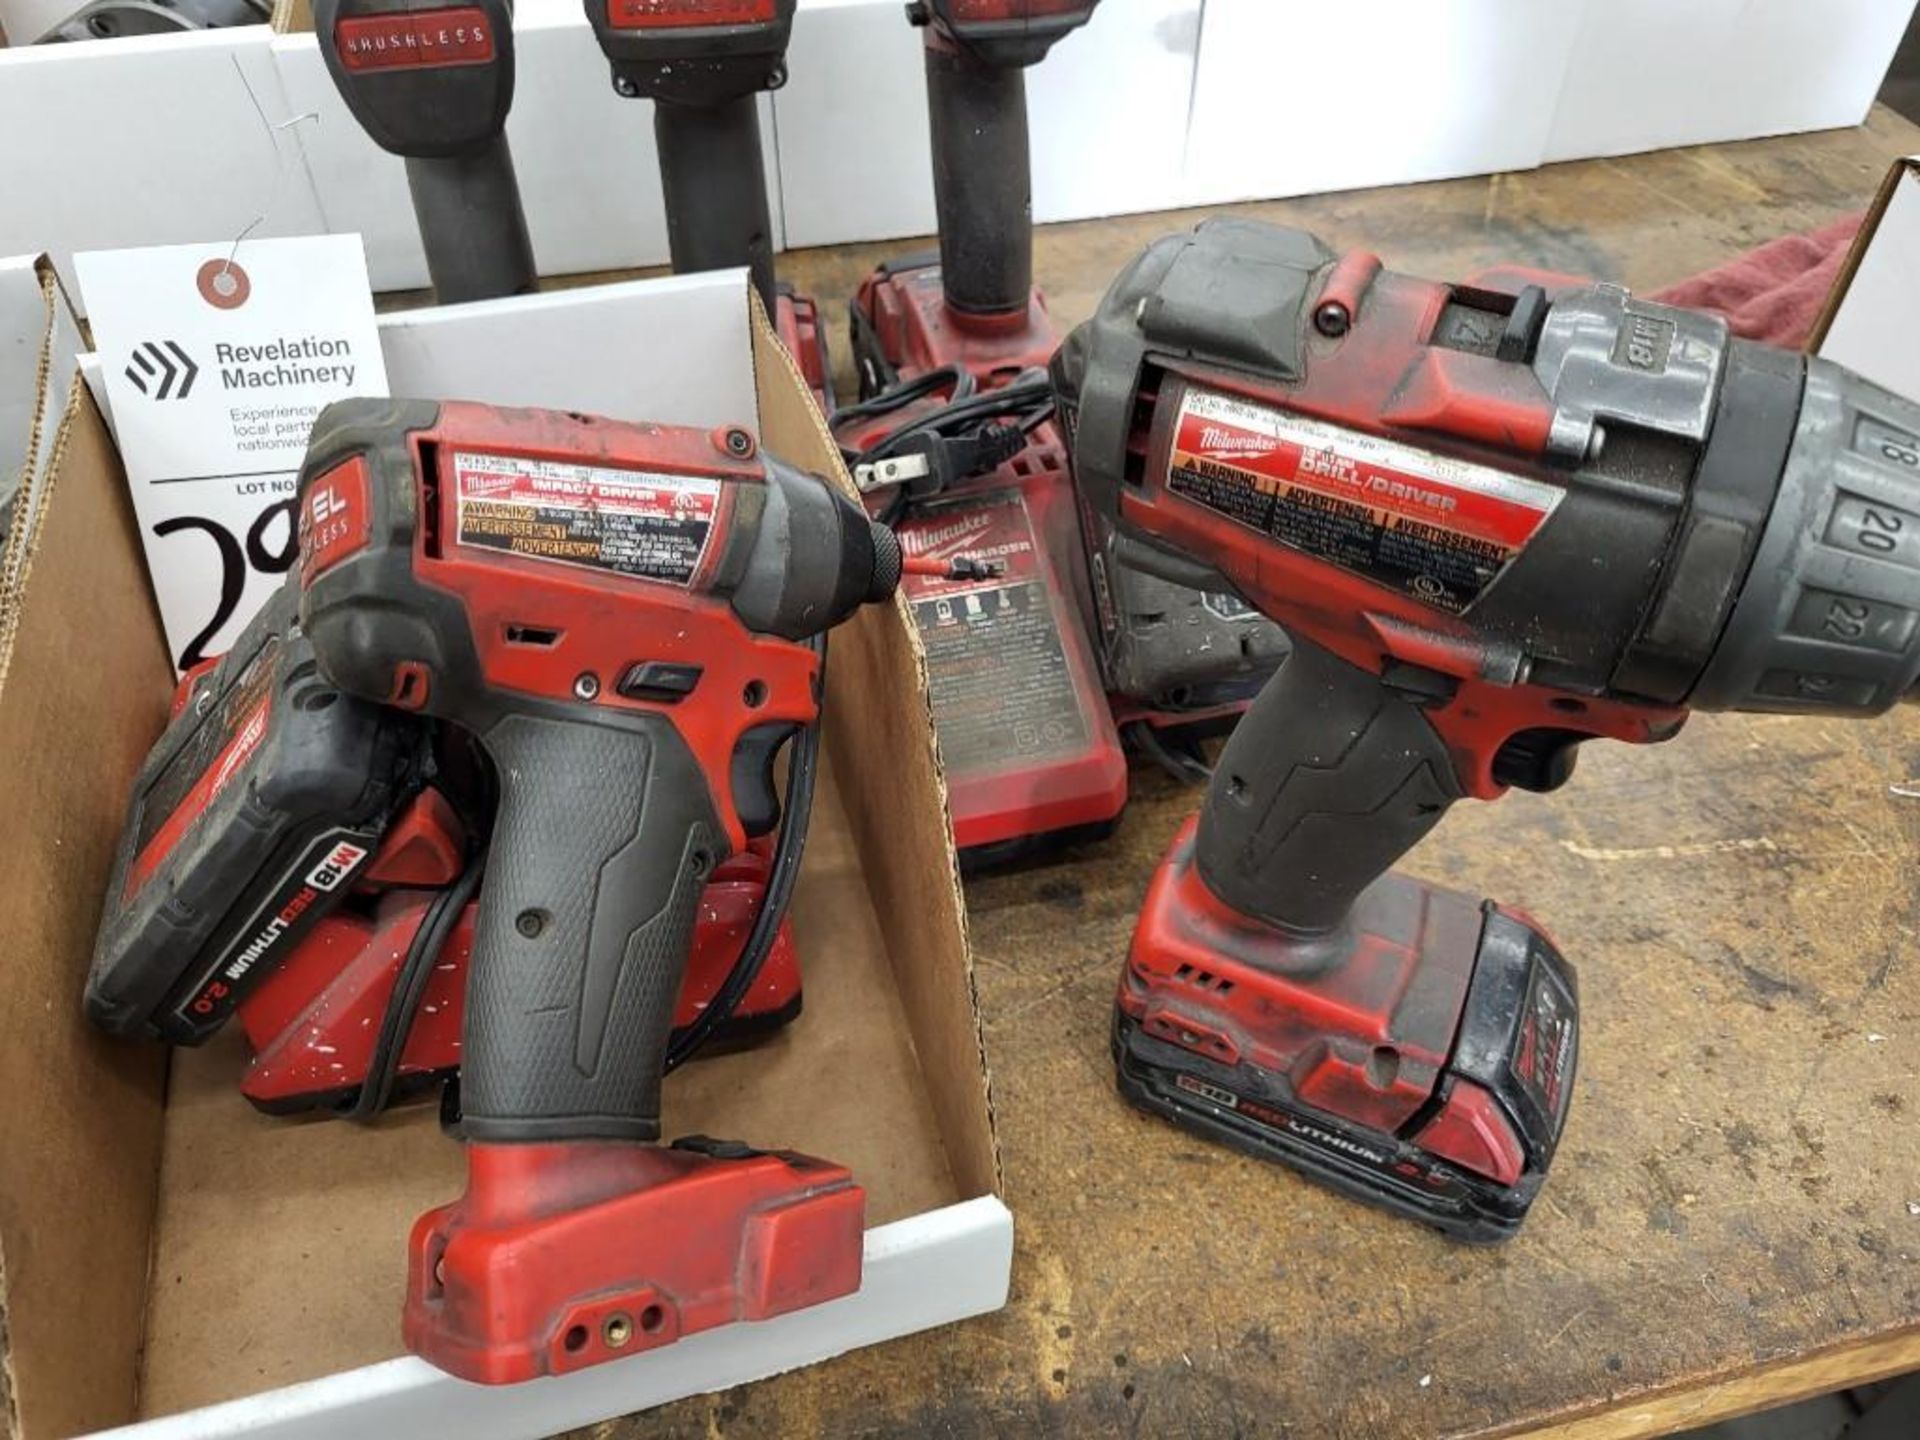 LOT OF MILWAUKEE CORDLIES DRILL DRIVERS, CIRCULAR SAW, CHARGERS, BATTERIES - Image 3 of 6